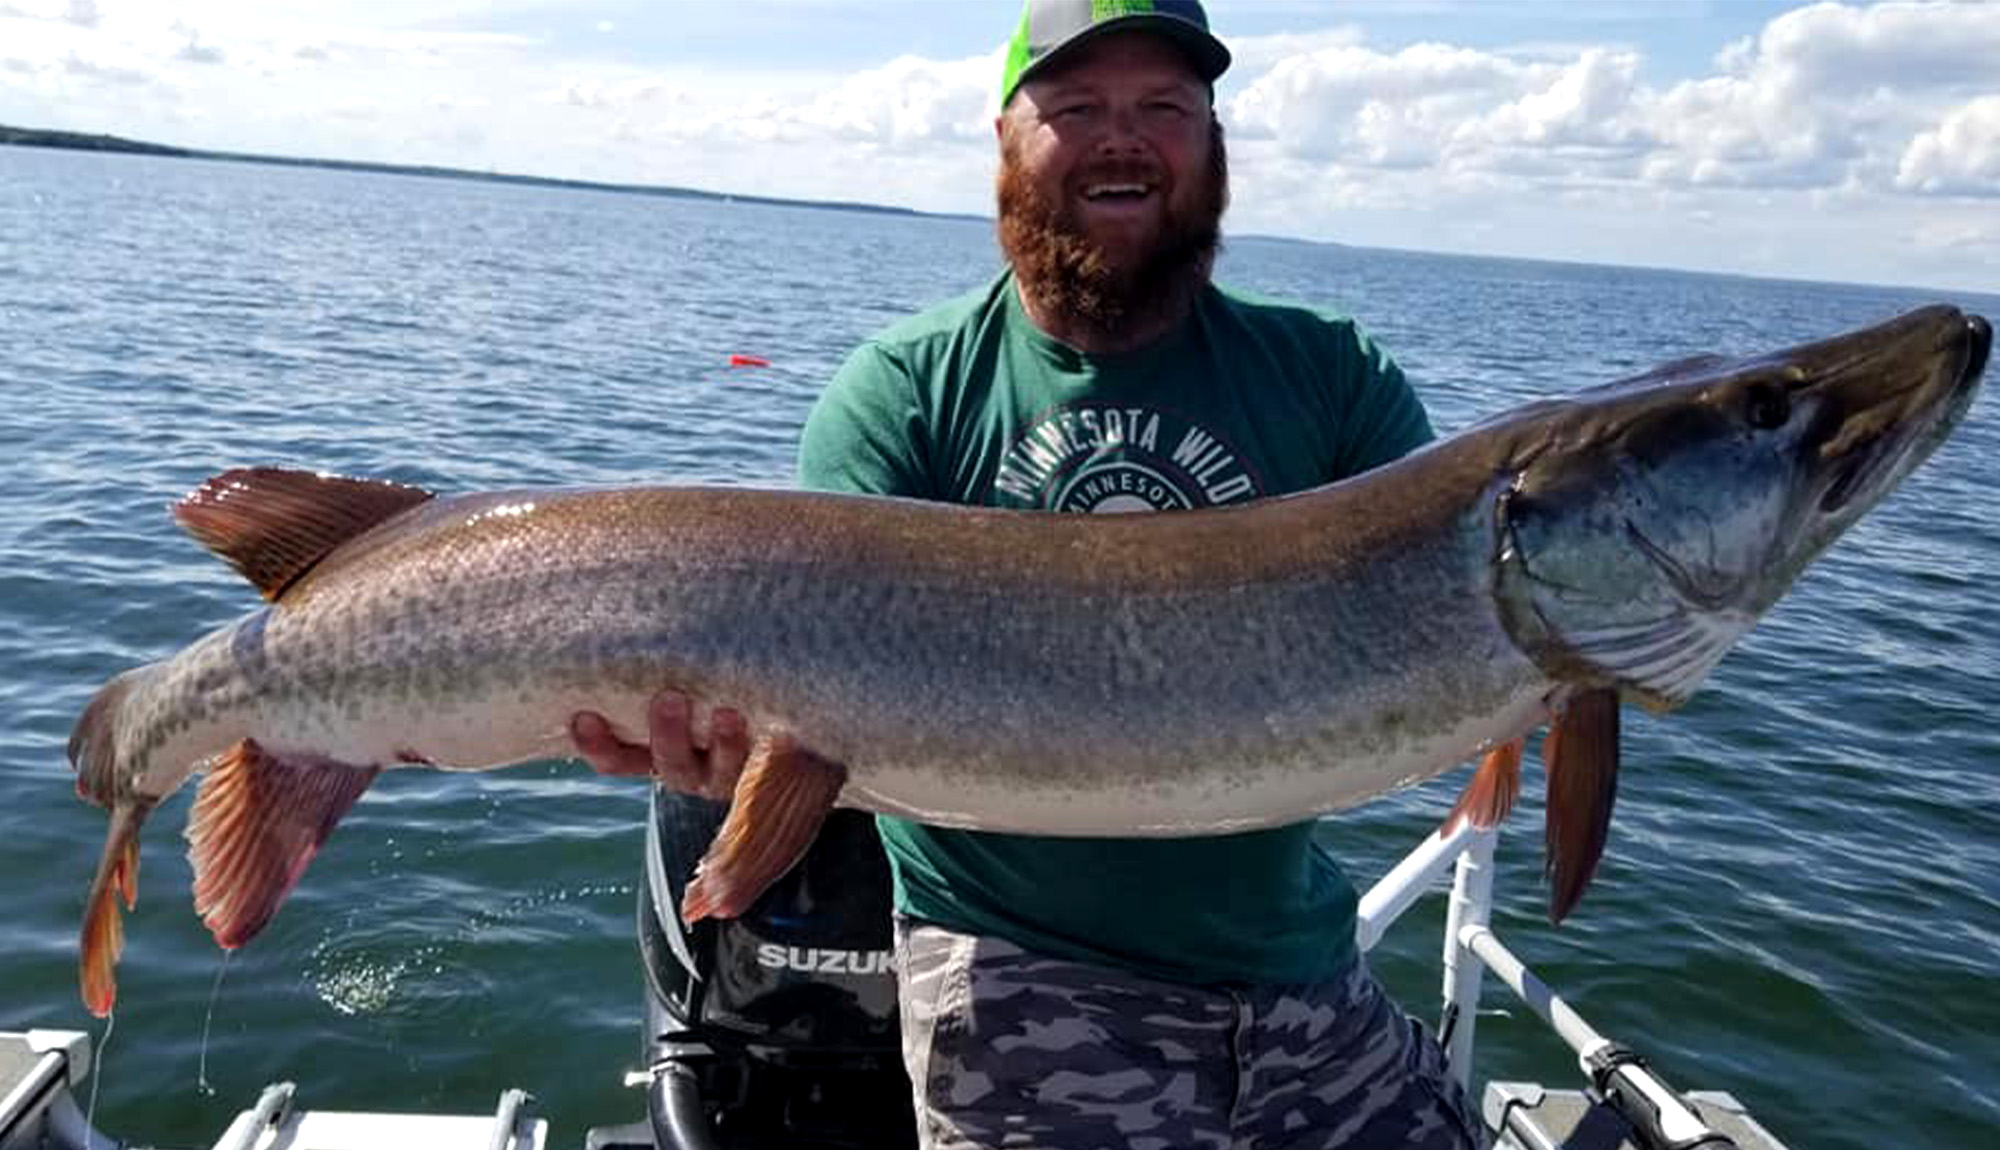 Minnesota Angler Catches State Record Muskie